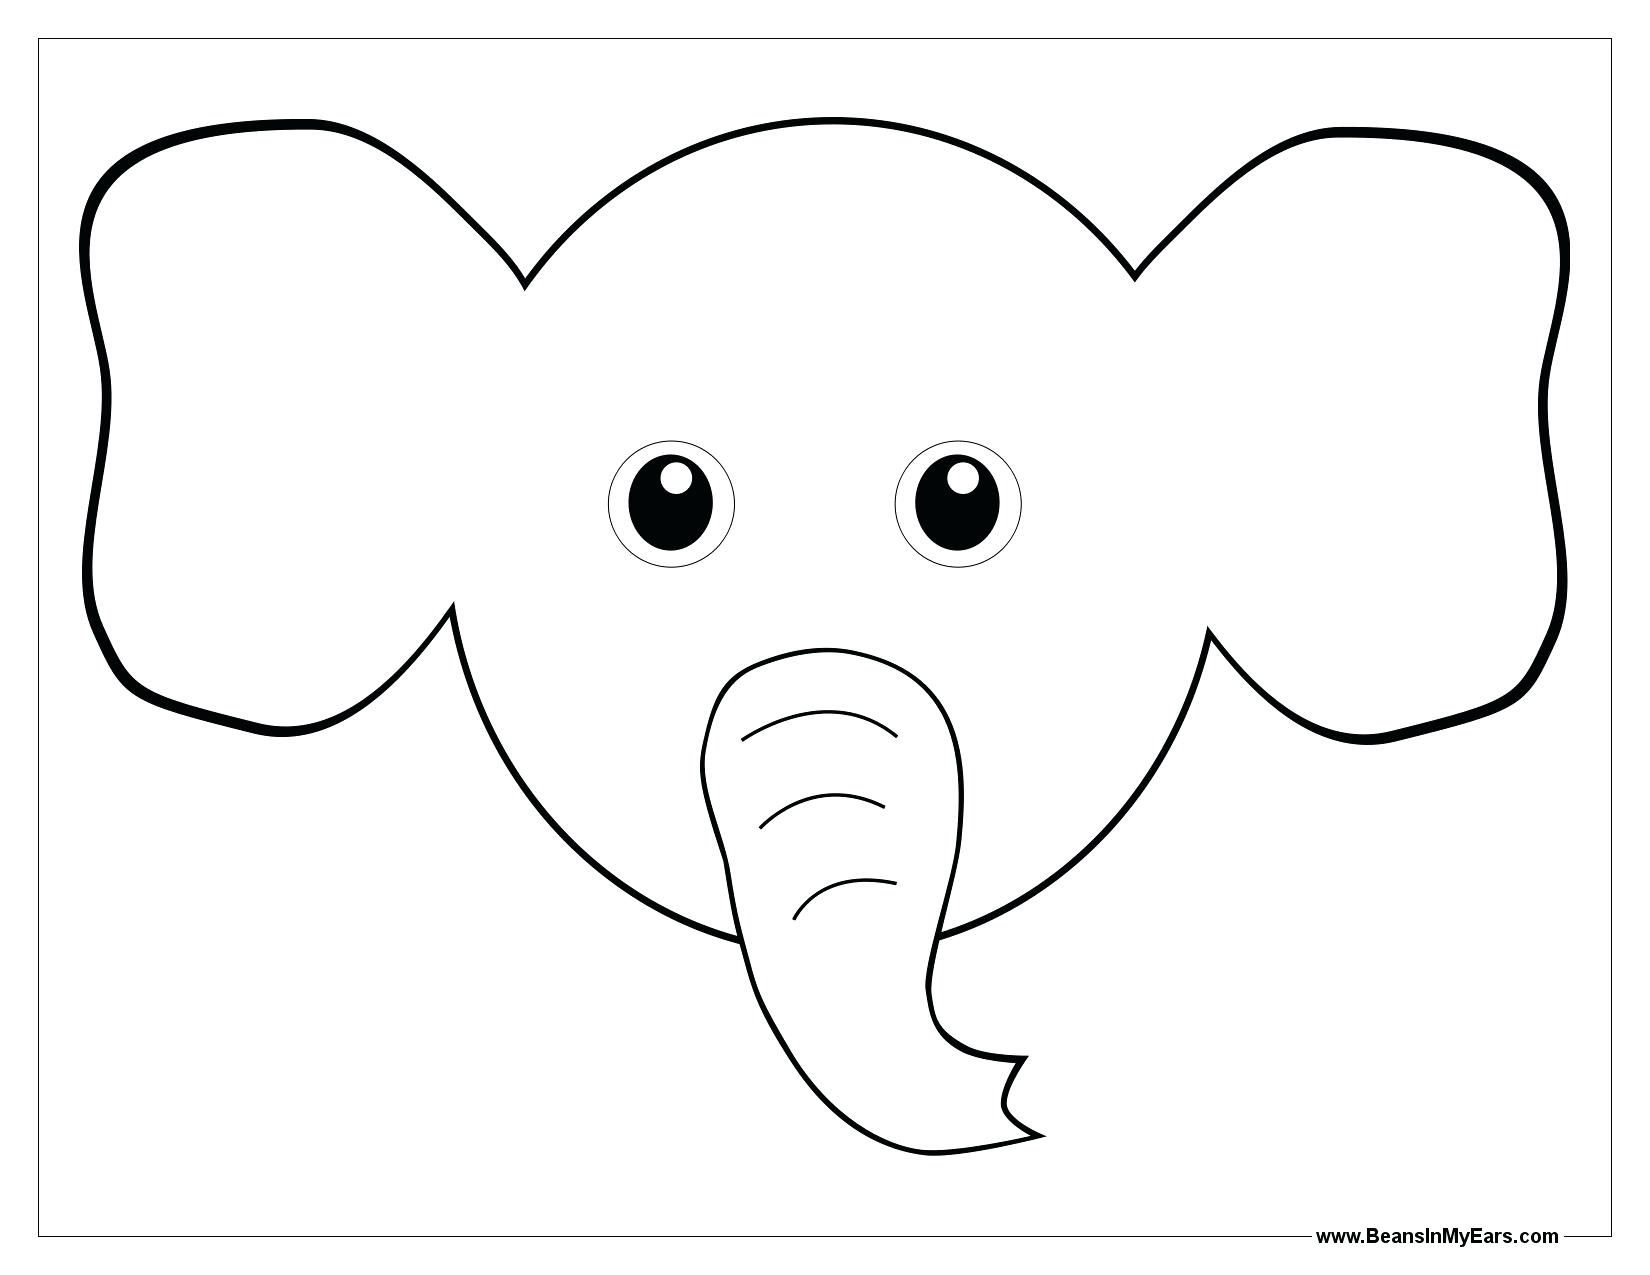 Bunny Ears Coloring Page at GetColorings.com | Free printable colorings